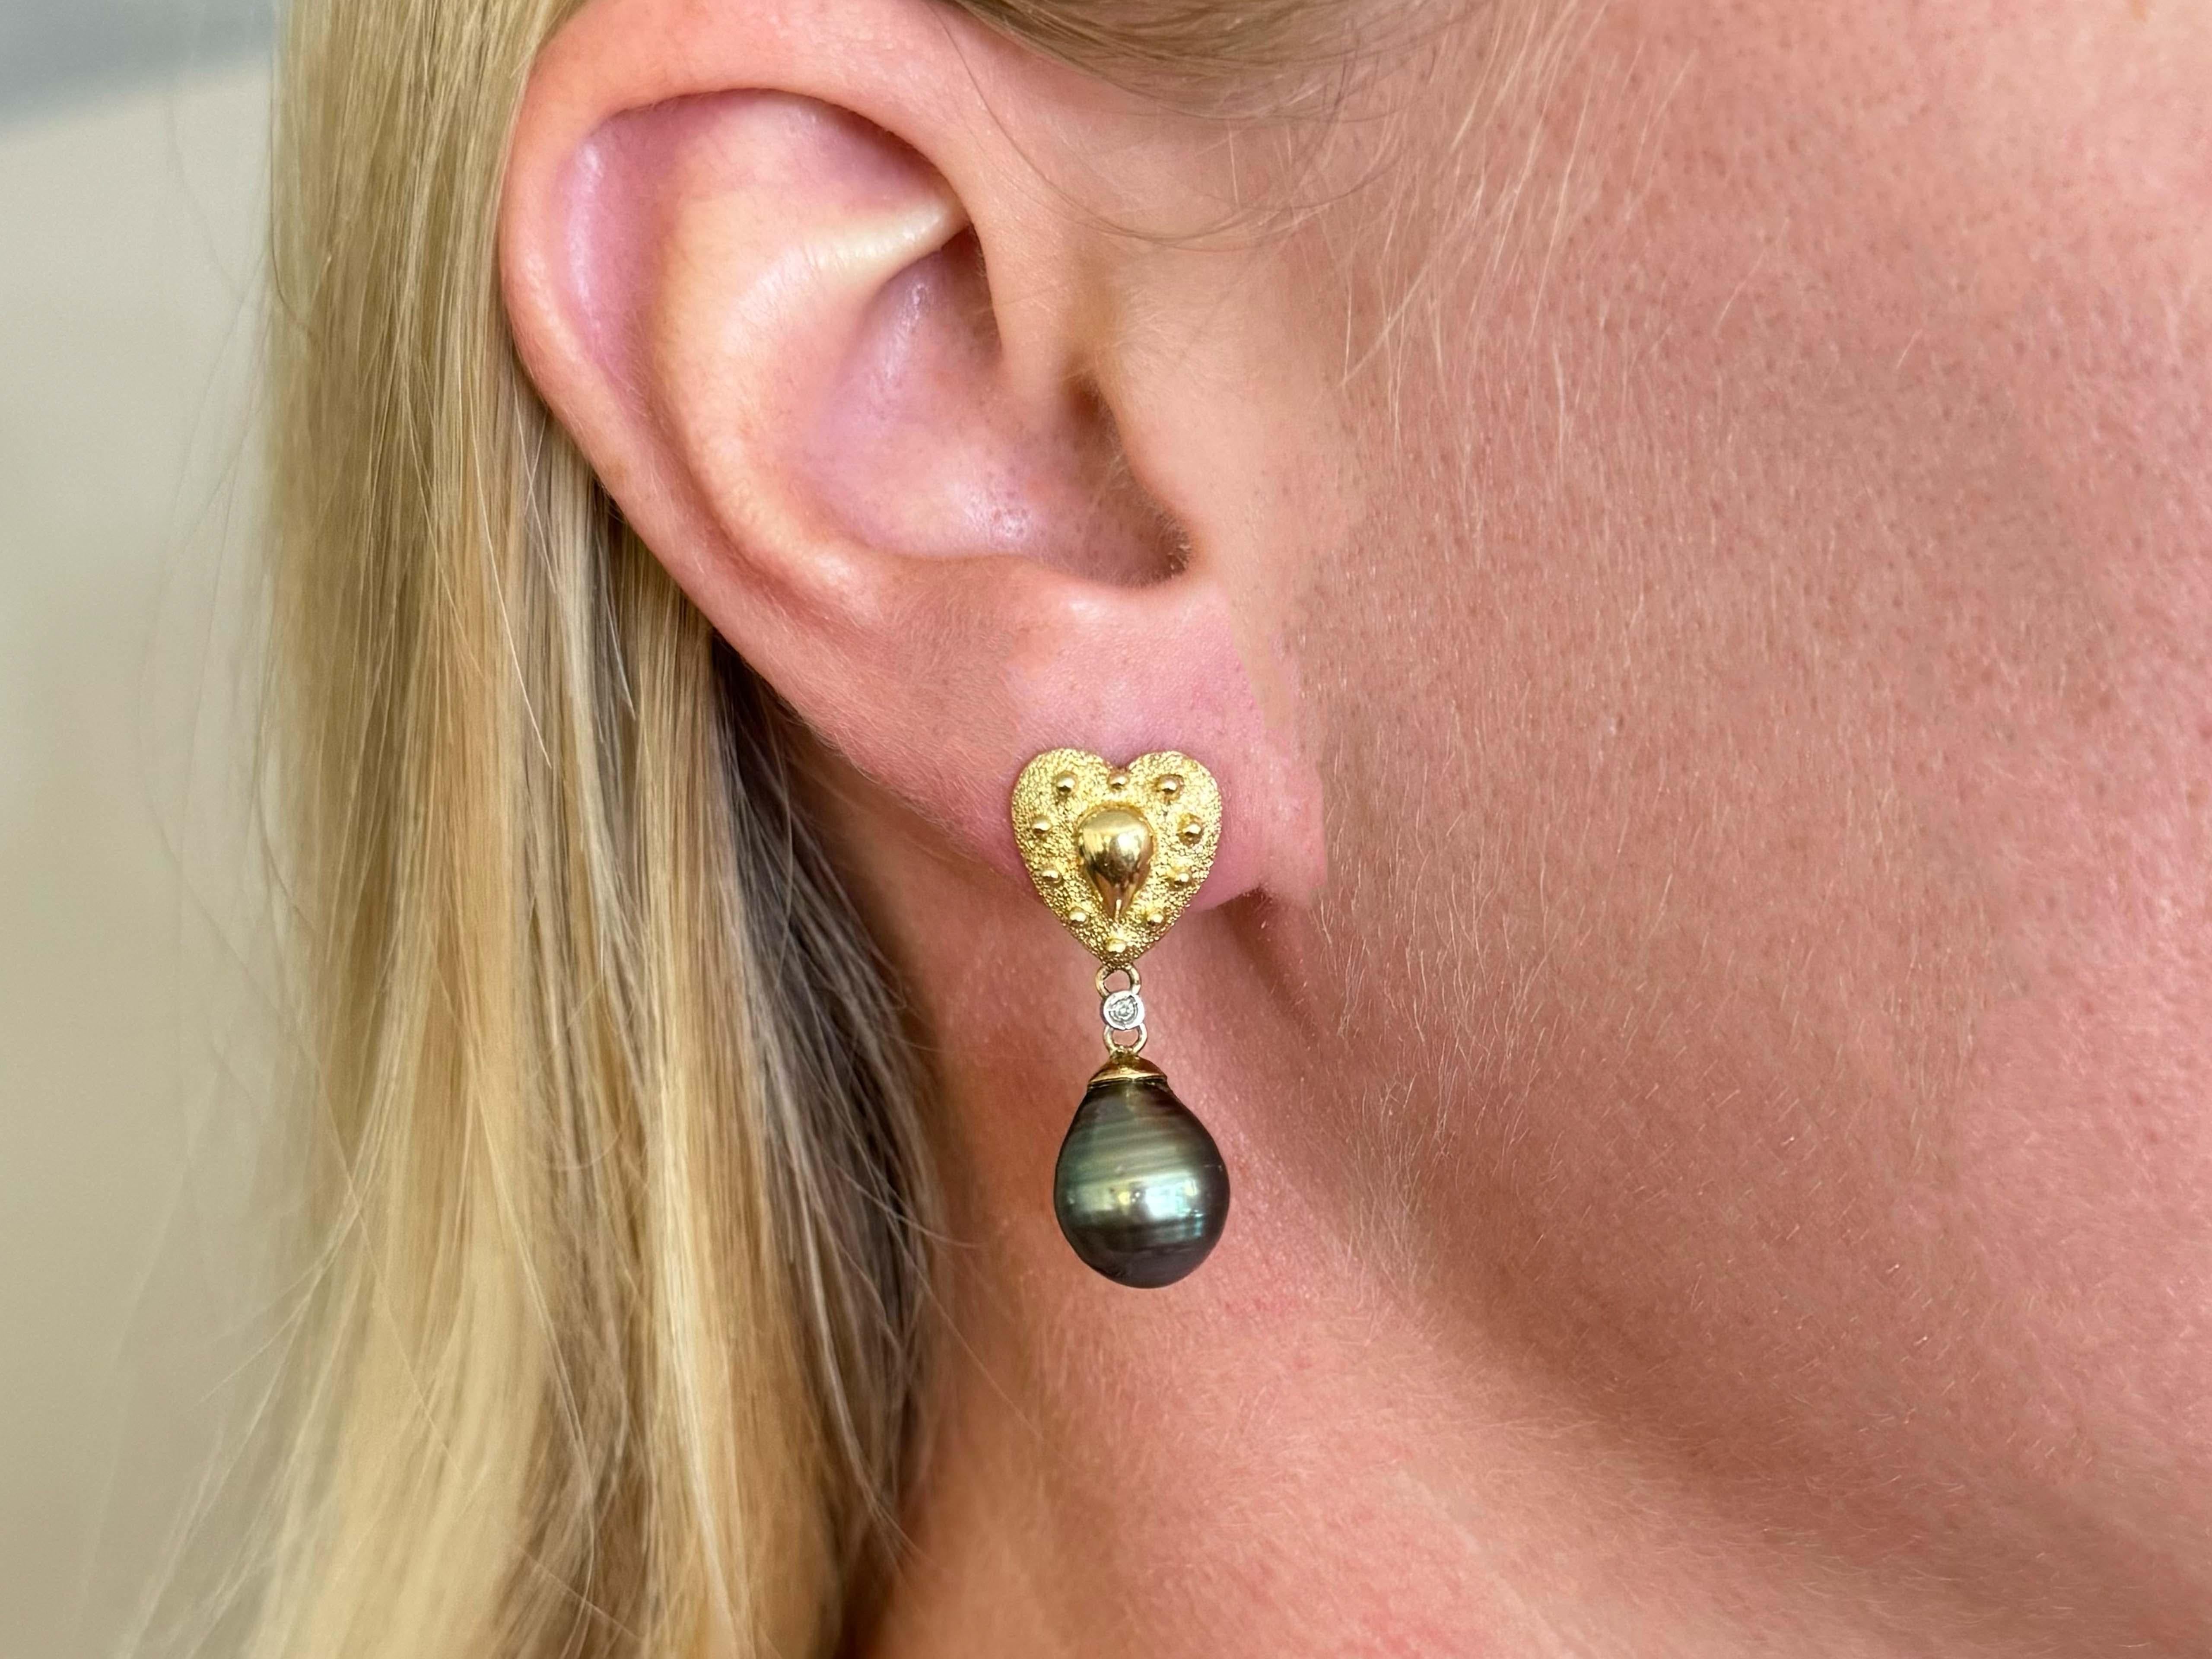 These stunning Tahitian pearls feature yellow, green and blue hues.

Earrings Specifications:

Metal: 14k Yellow Gold

Earring Length: 1.2